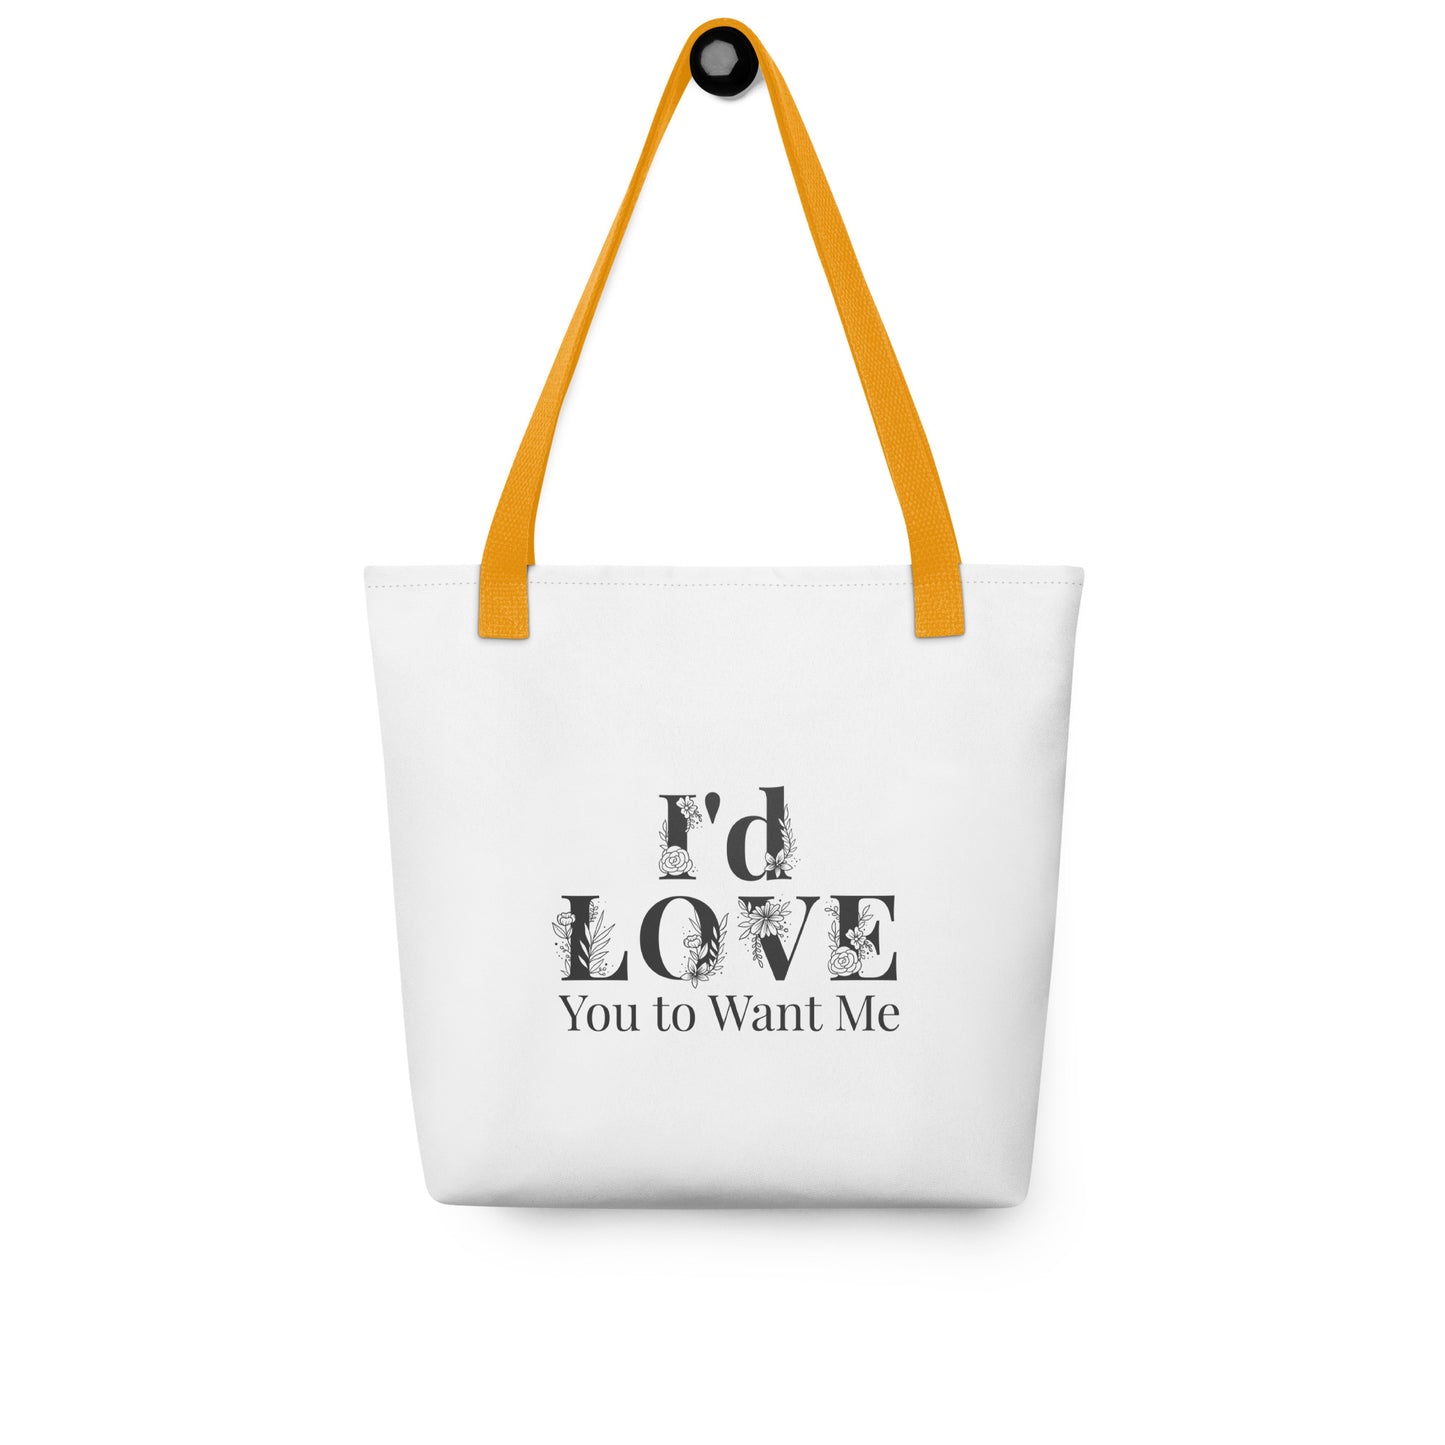 I'd Love You To Want Me Tote Bag (Flower Design)